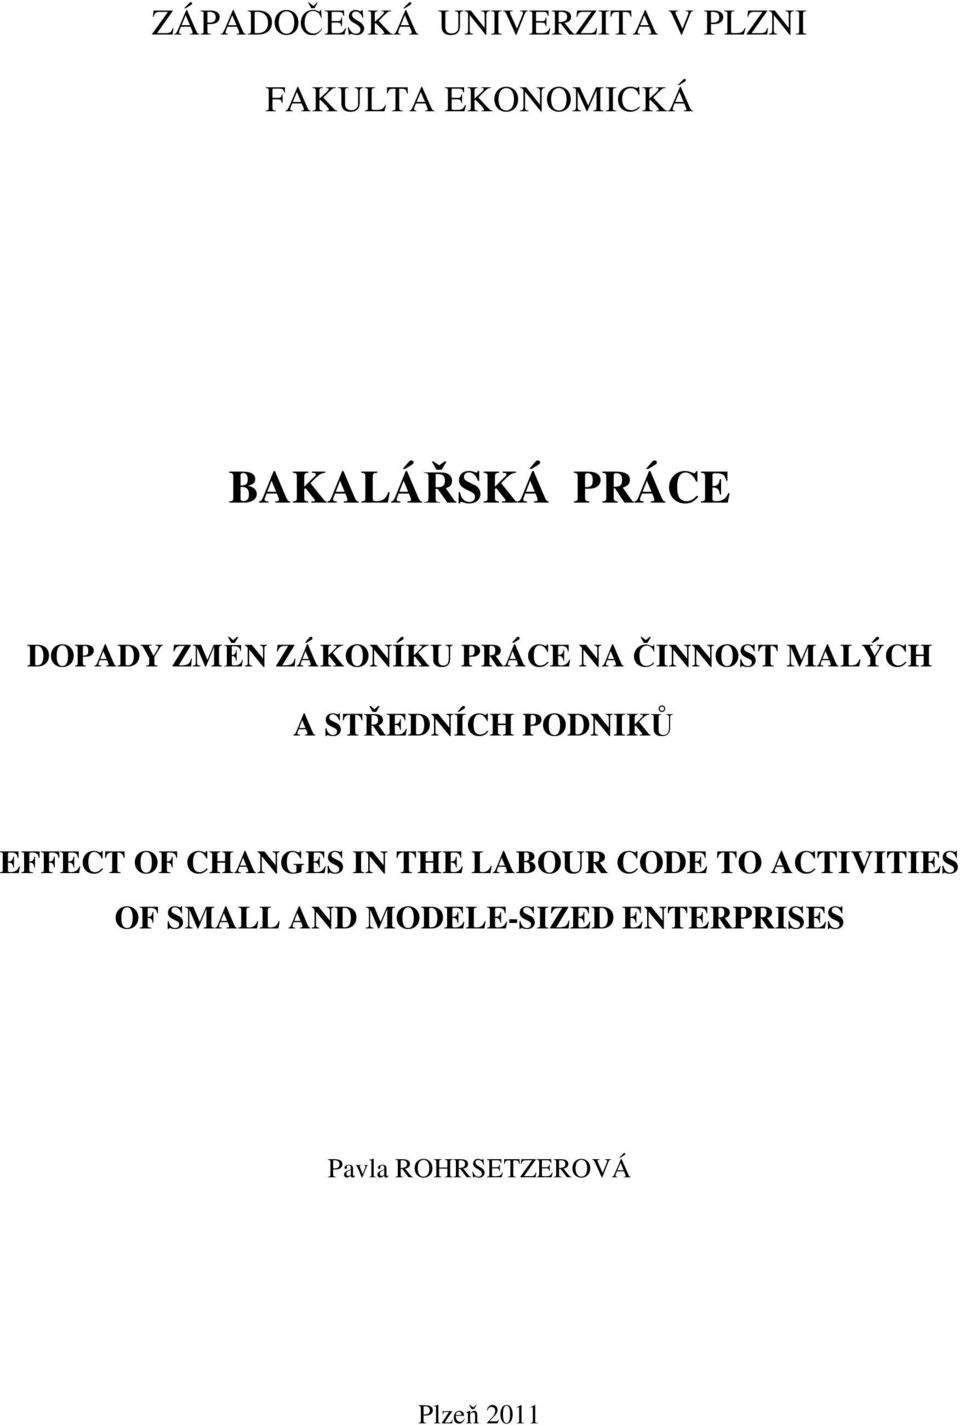 PODNIKŮ EFFECT OF CHANGES IN THE LABOUR CODE TO ACTIVITIES OF